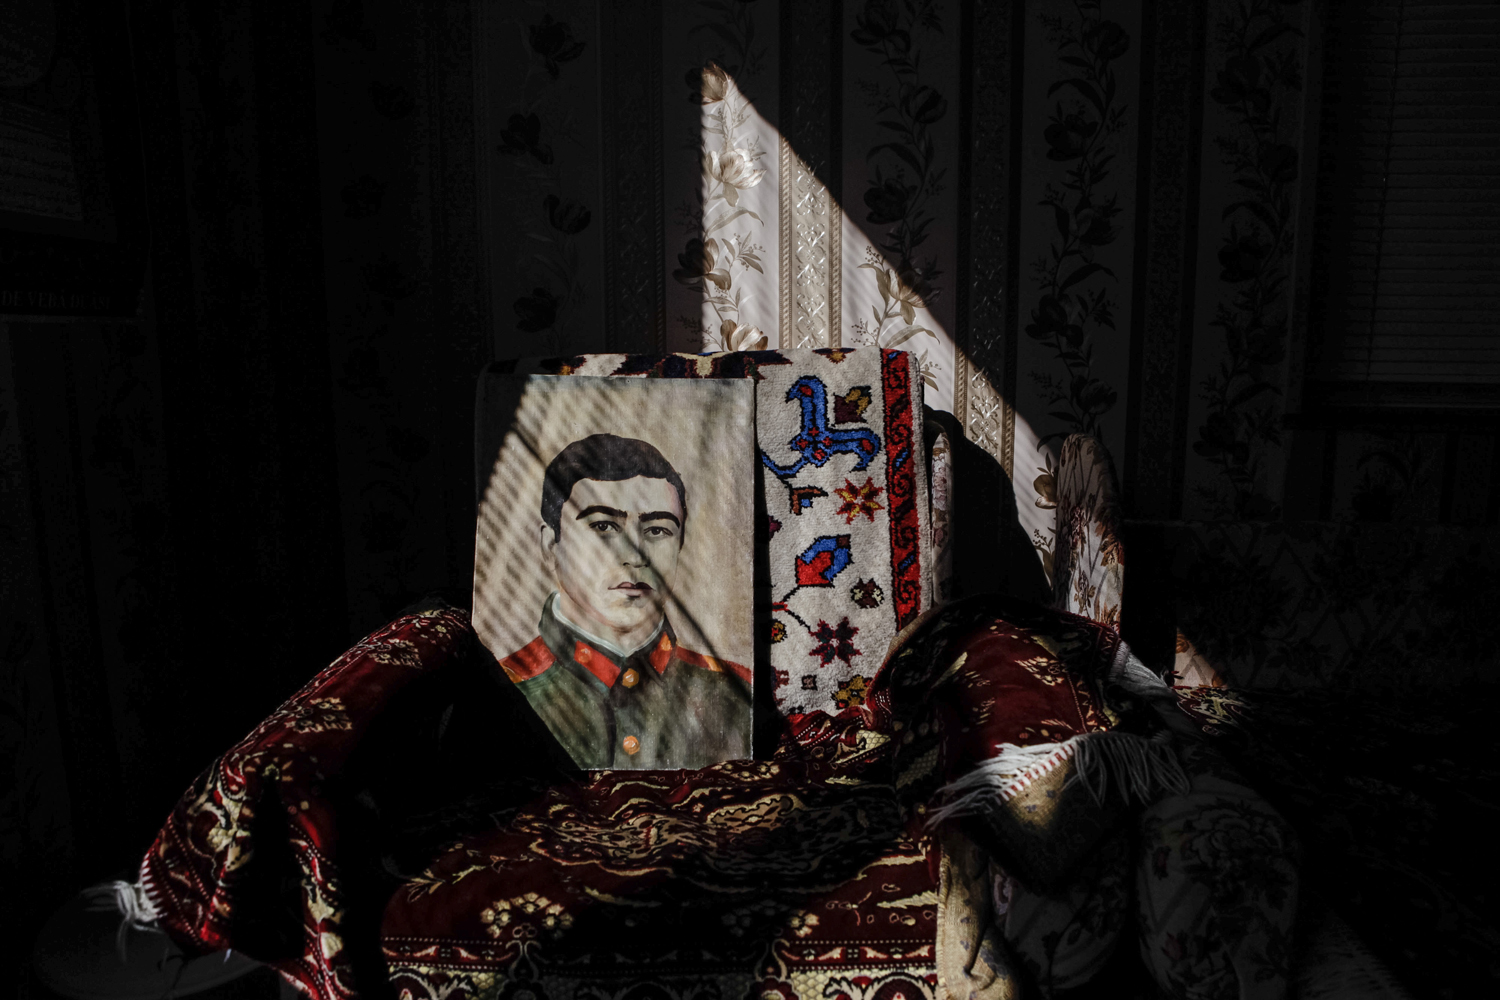 A portrait of a military man seen in a village house in Bezhta.